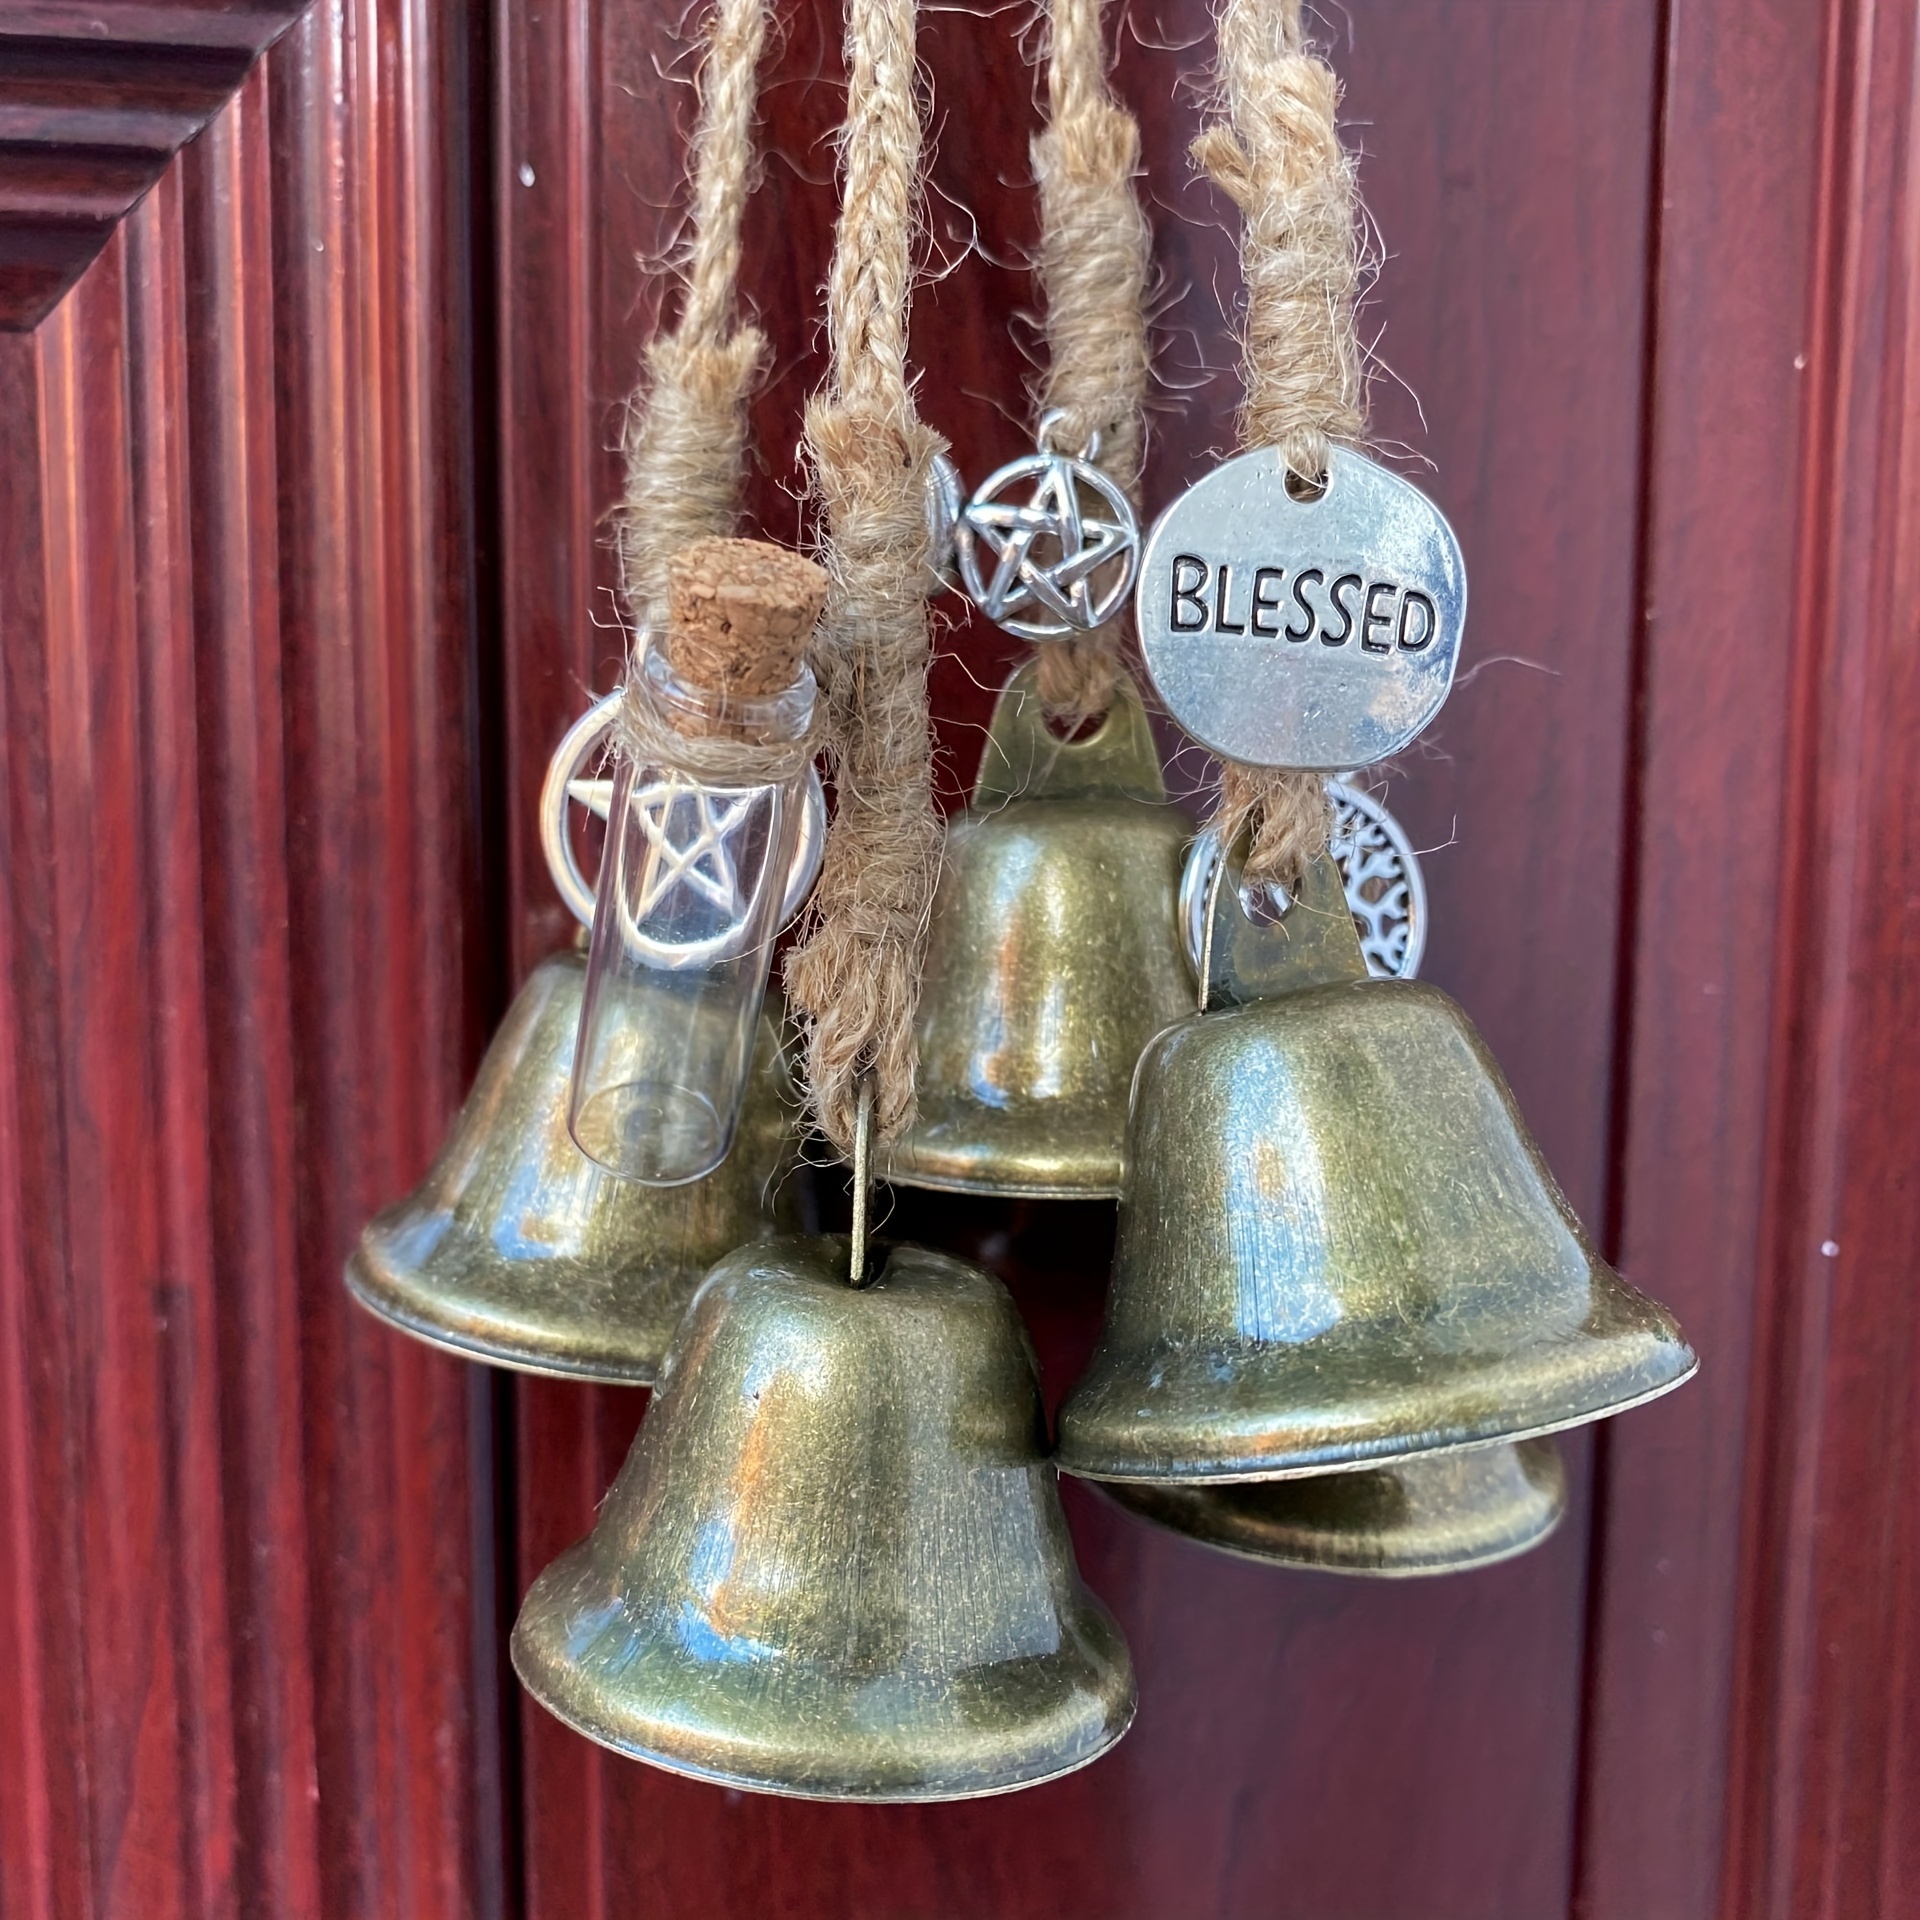 witches bells at the front door for protection, luck, and